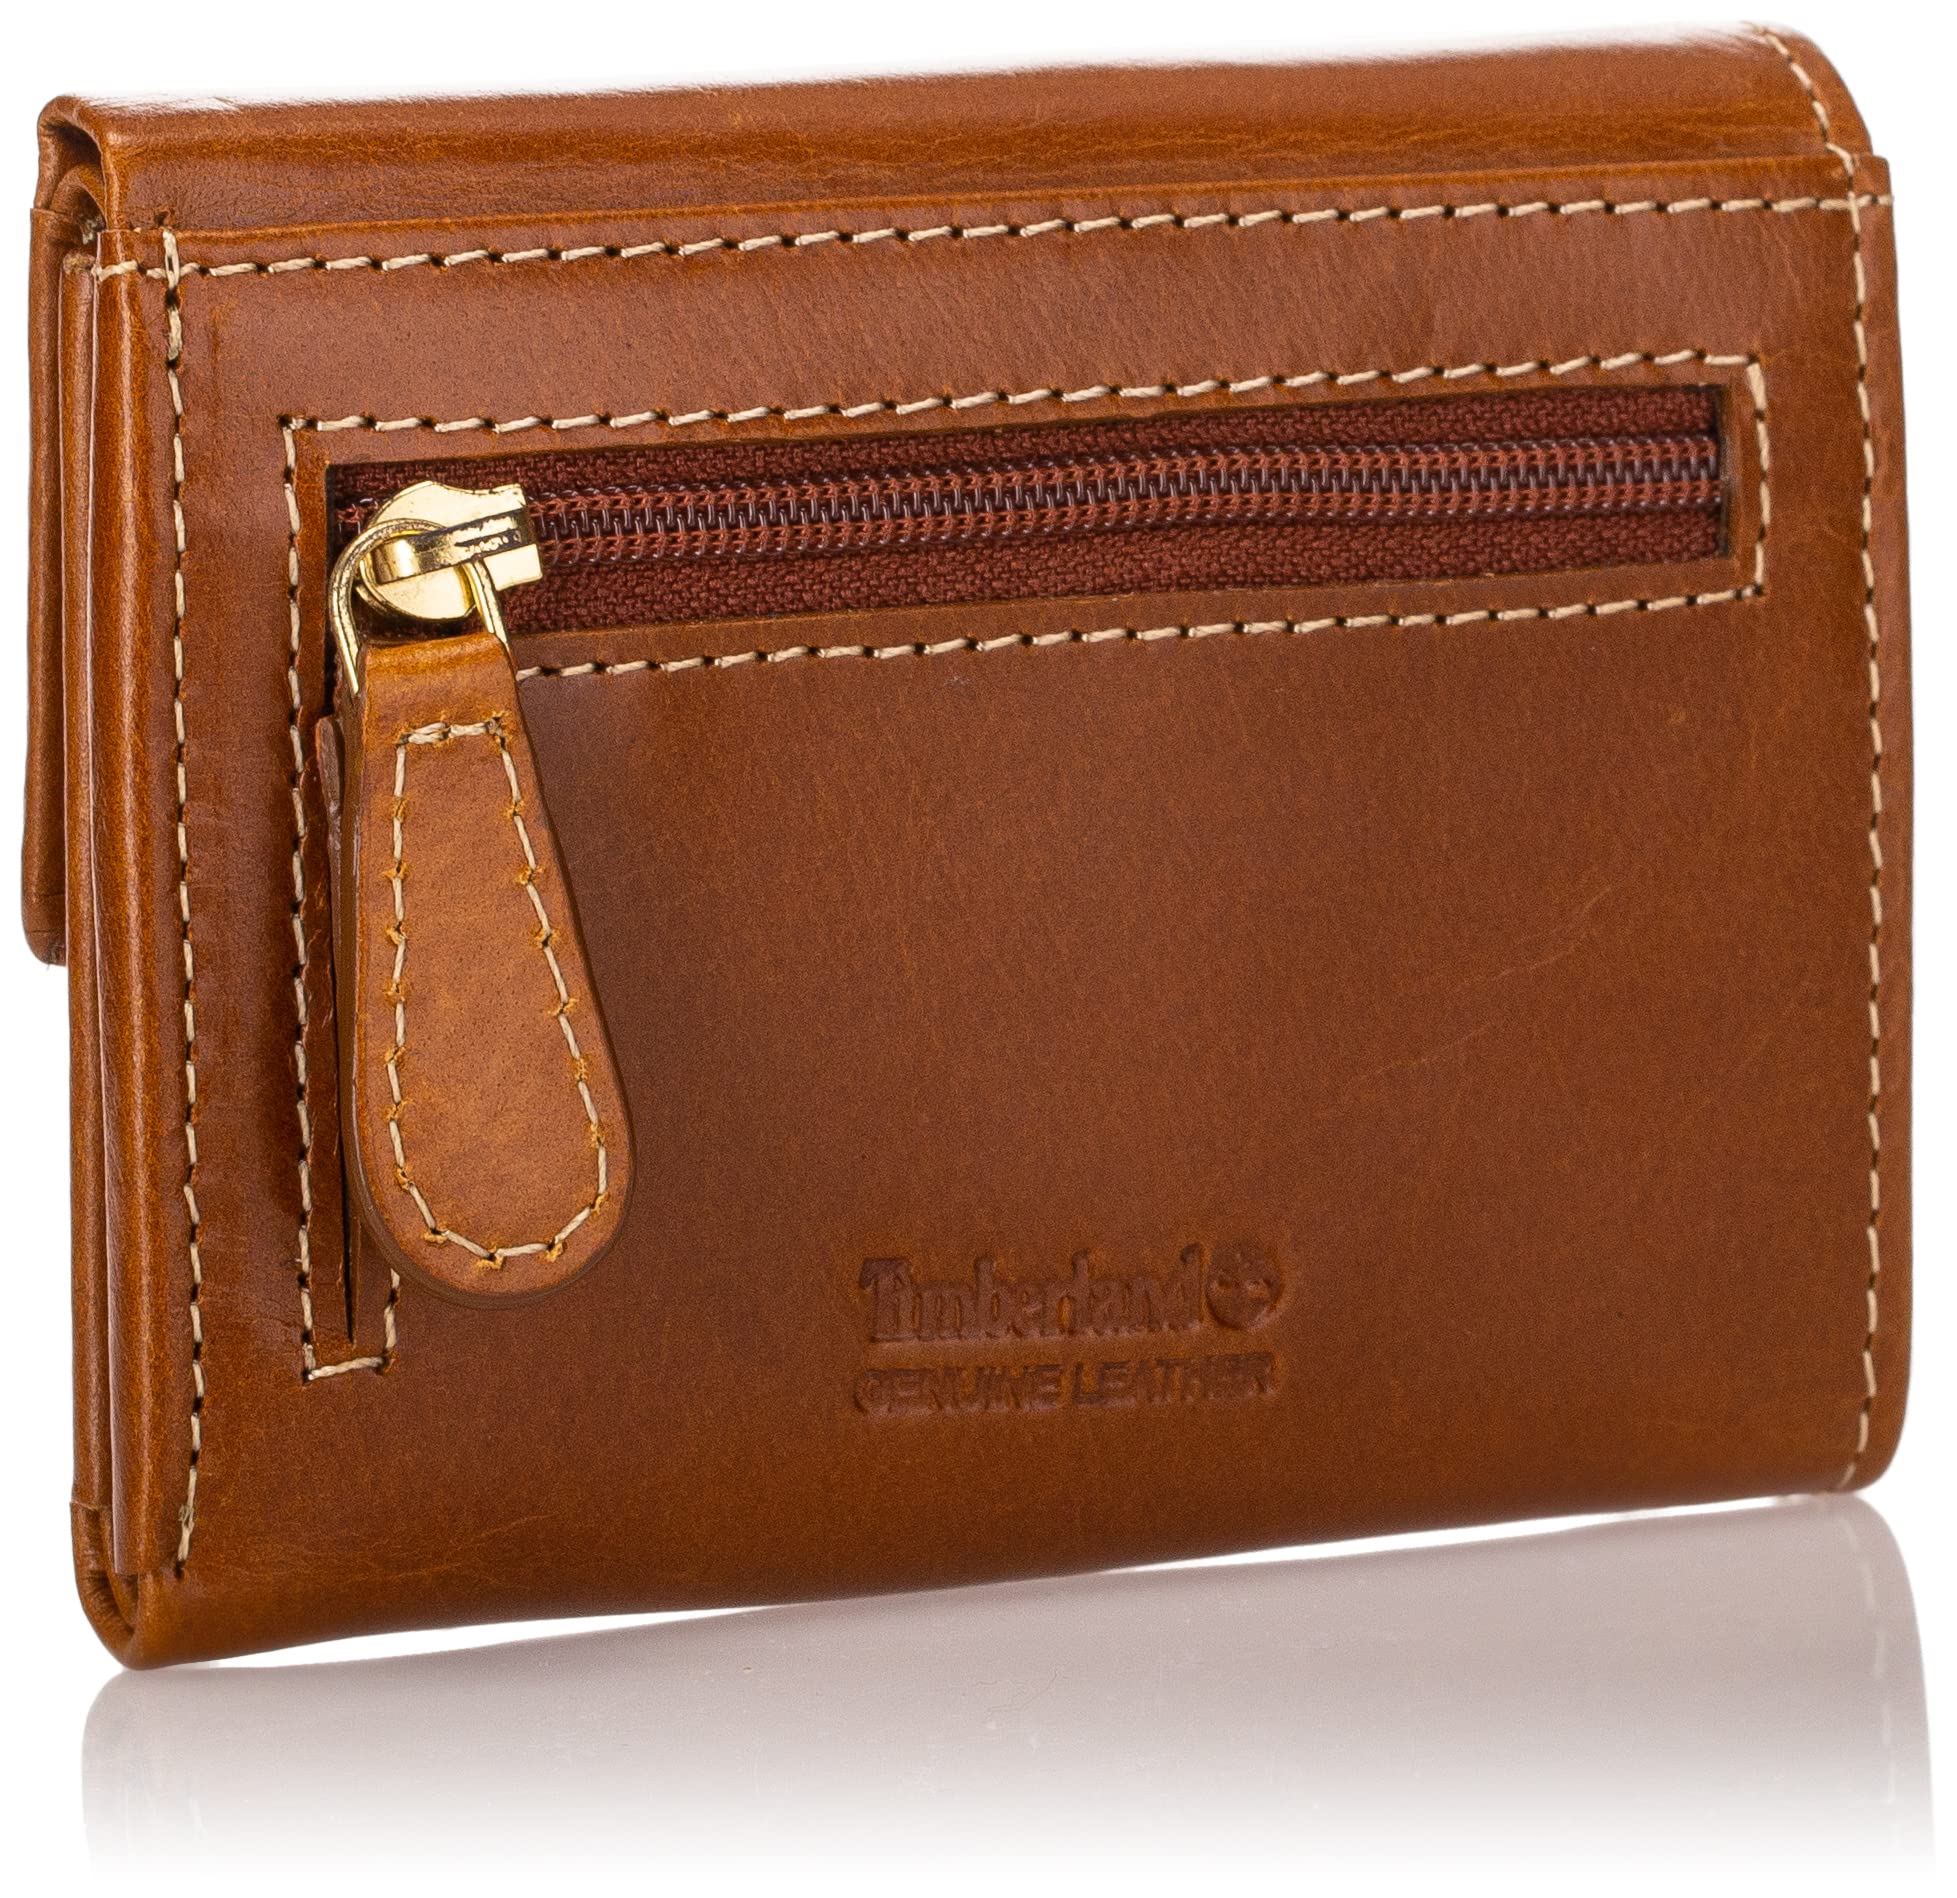 Timberland Women's Leather RFID Small Indexer Snap Wallet Billfold